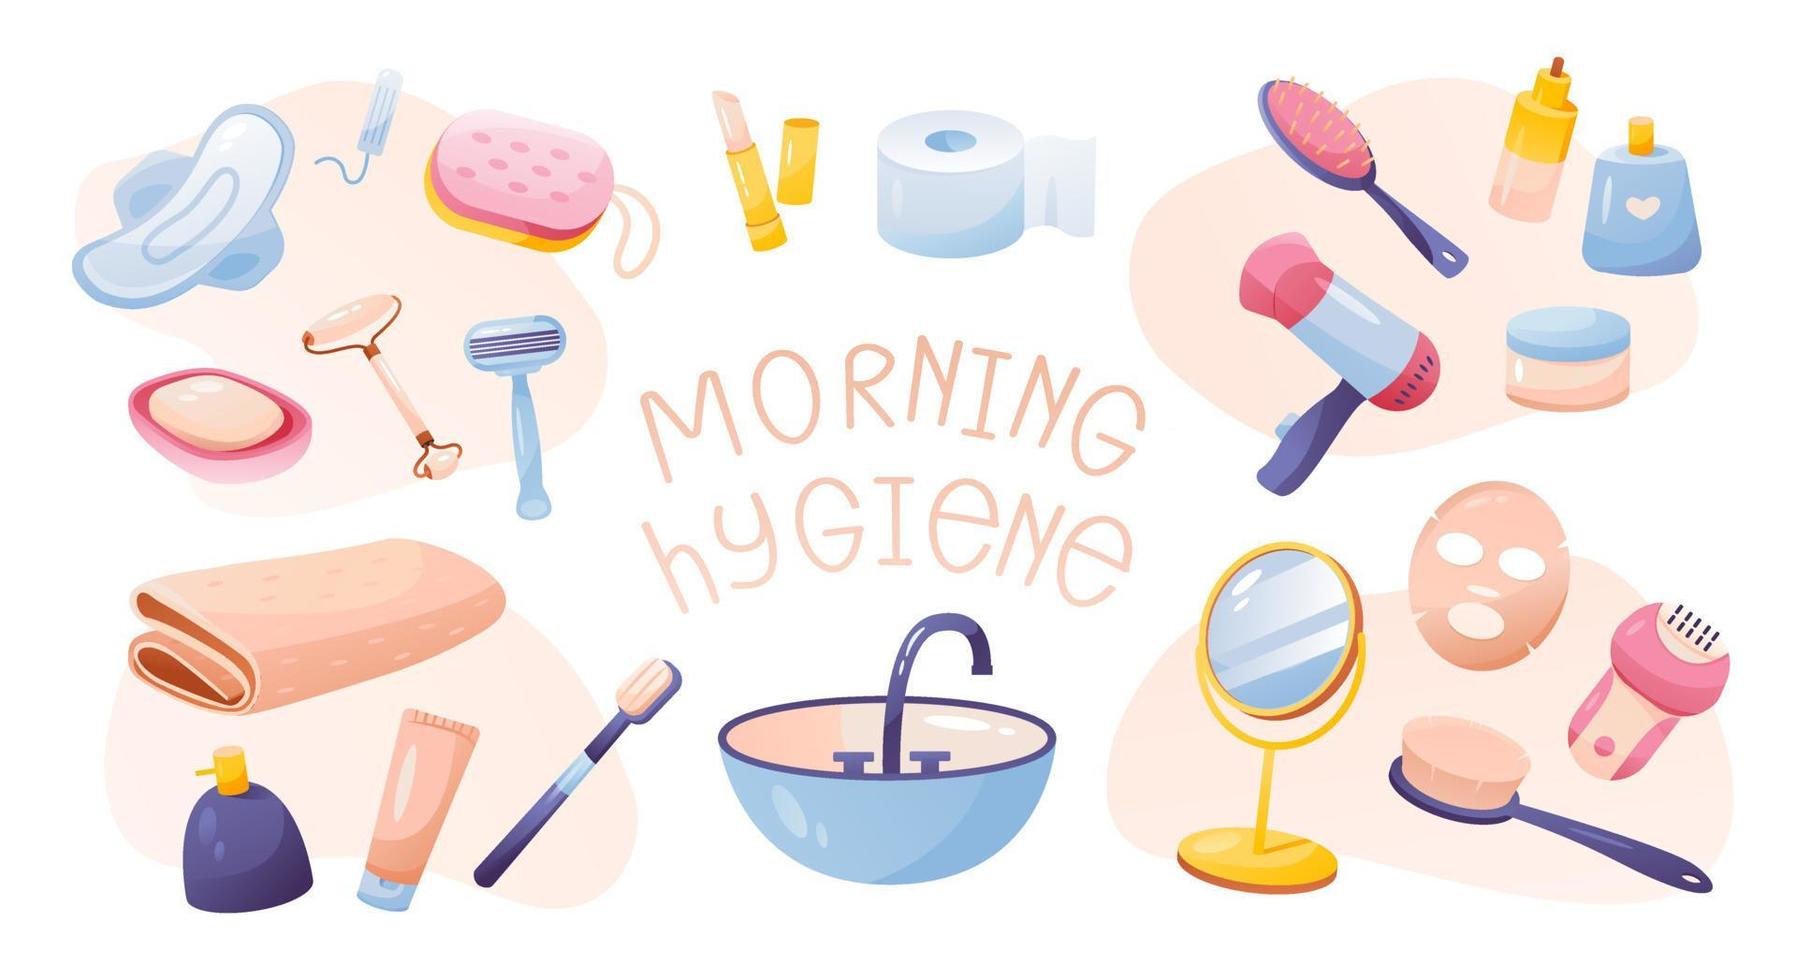 Morning hygiene collection.  A set of items for morning feminine hygiene. Self care at home. Cartoon vector illustration.